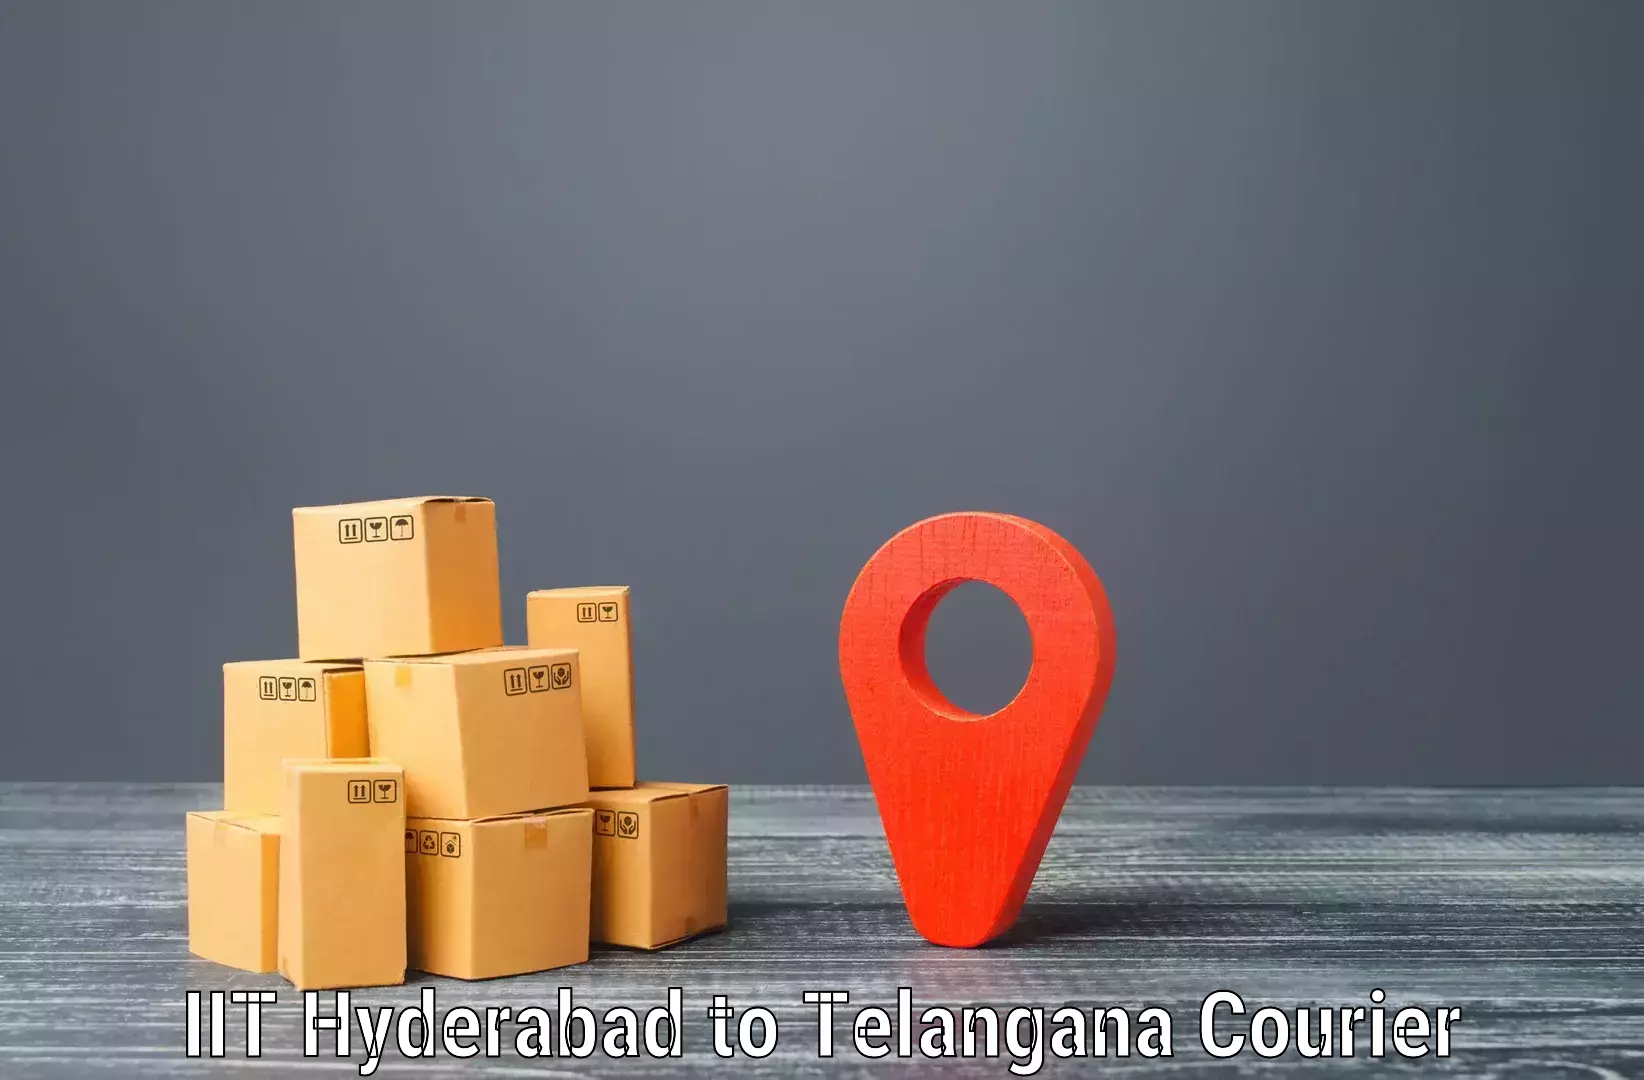 Advanced shipping services IIT Hyderabad to Khairatabad